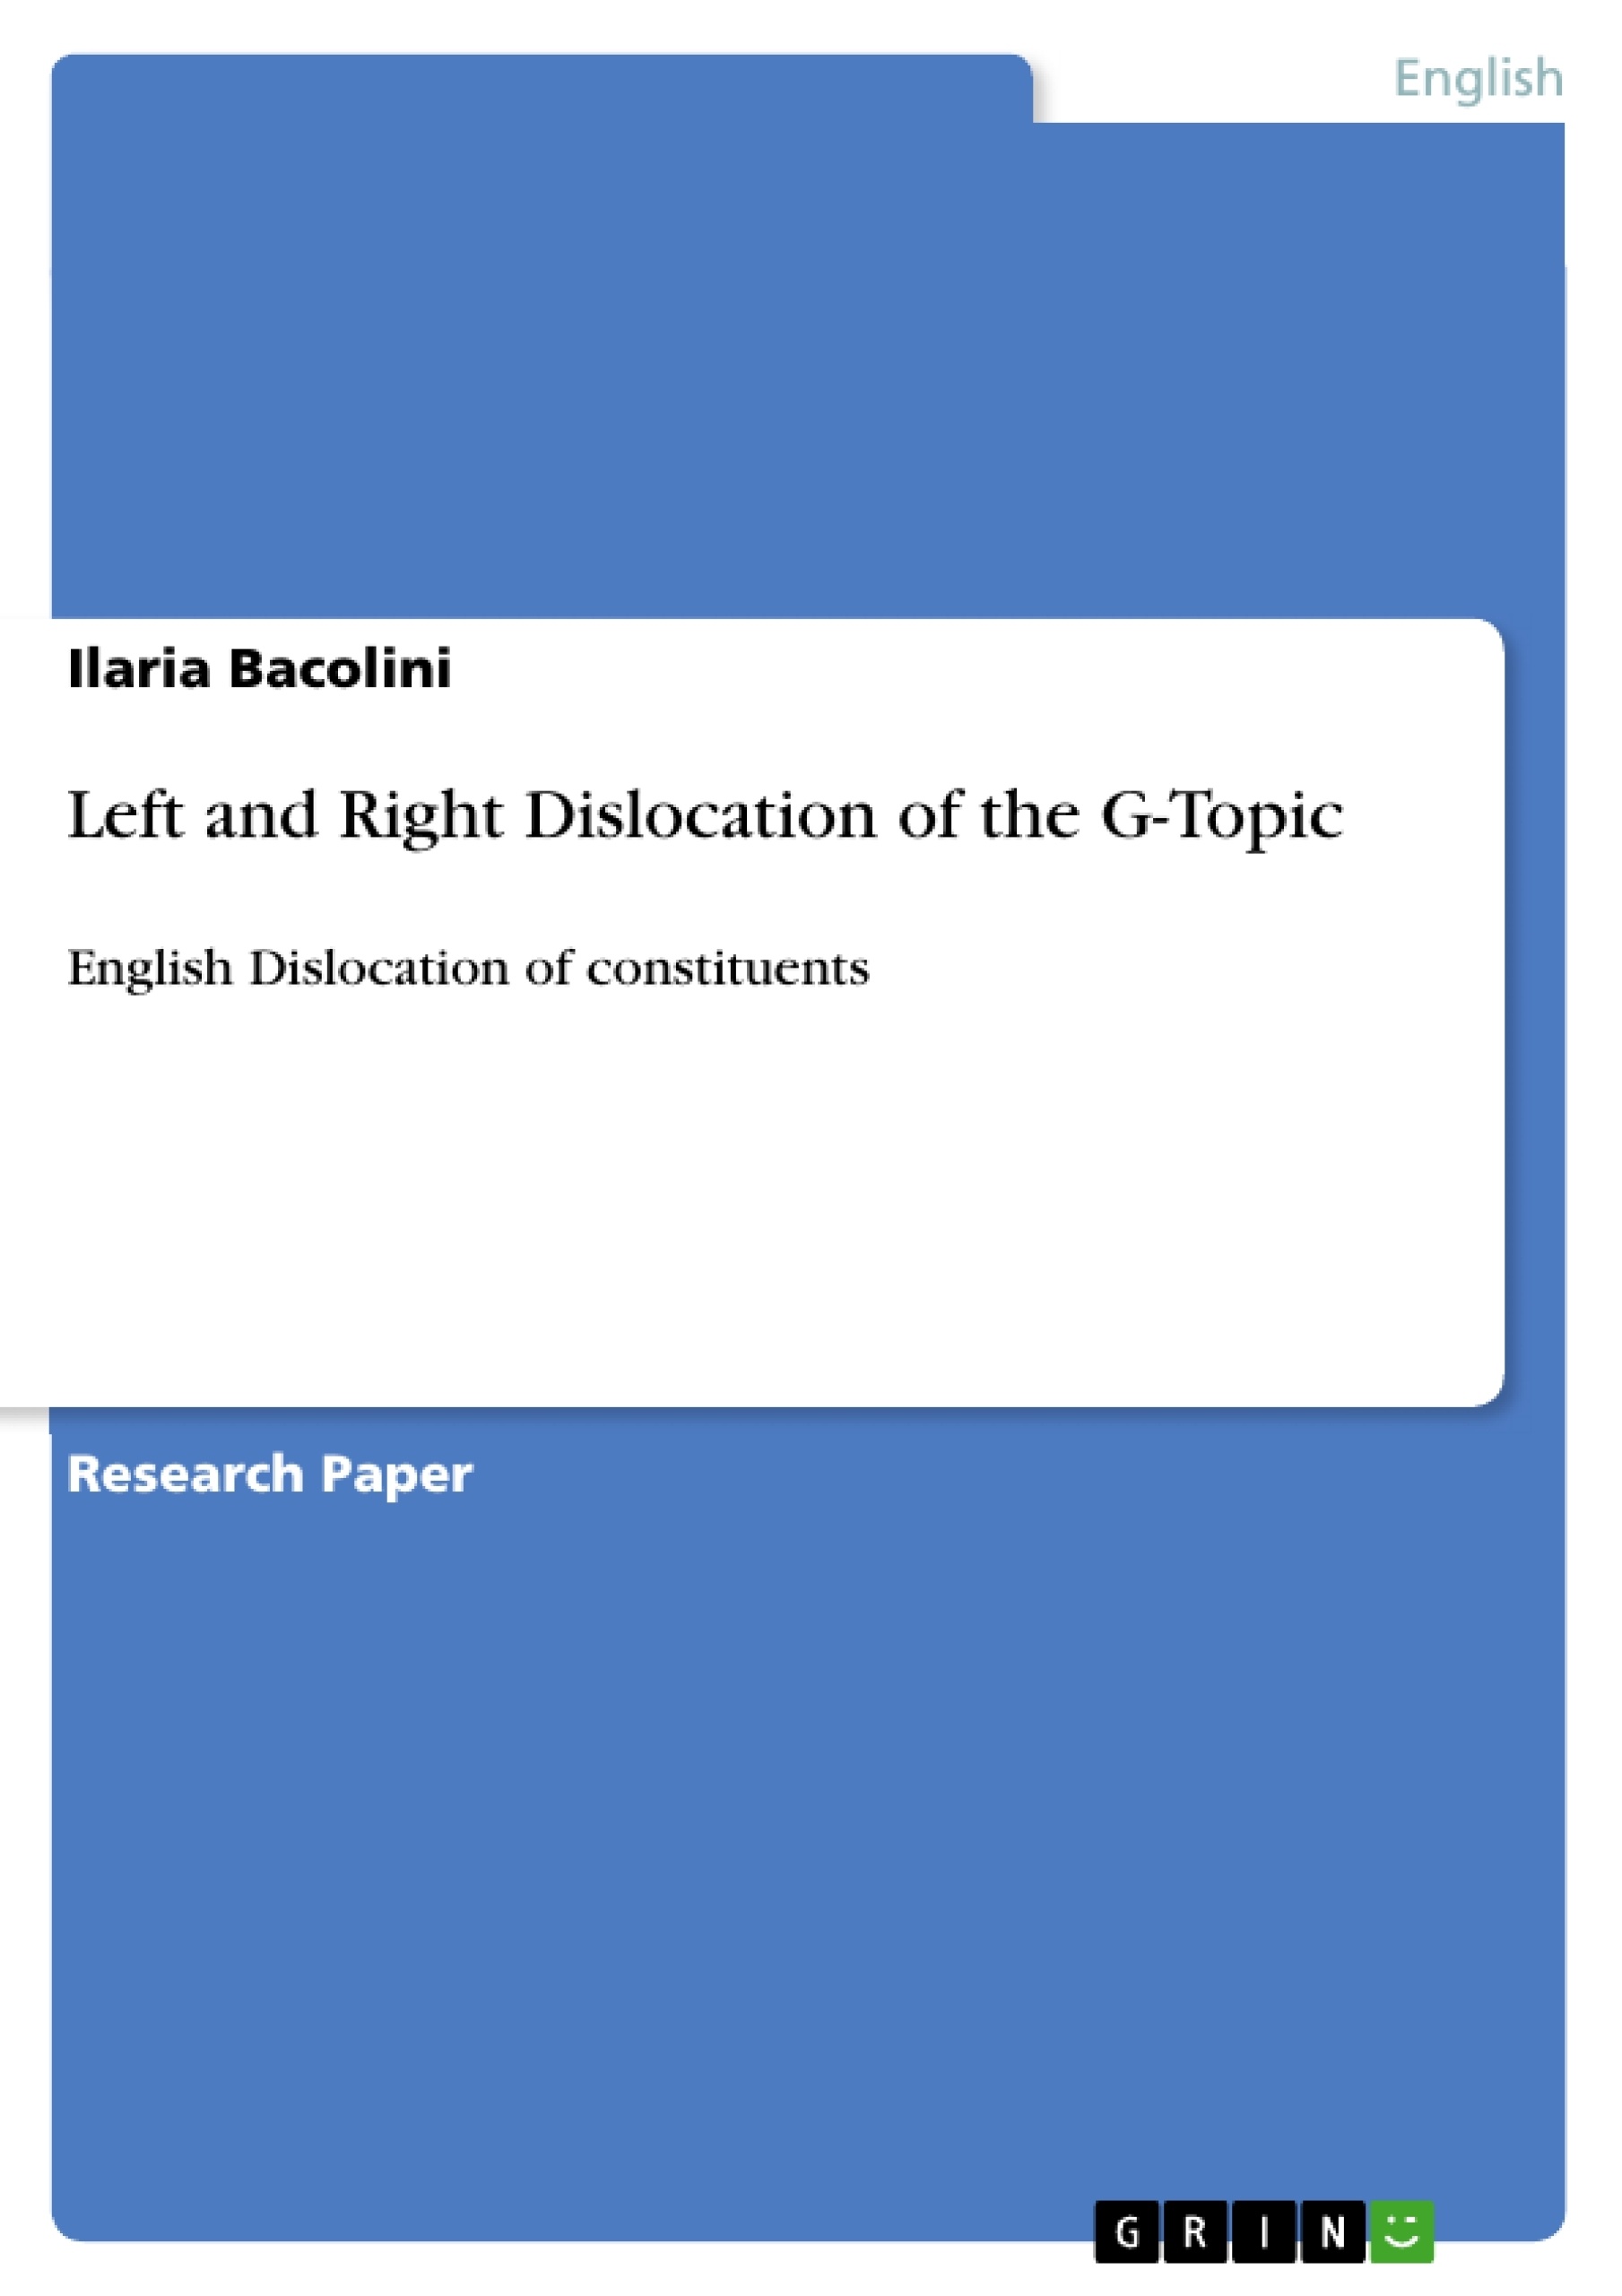 Título: Left and Right Dislocation of the G-Topic